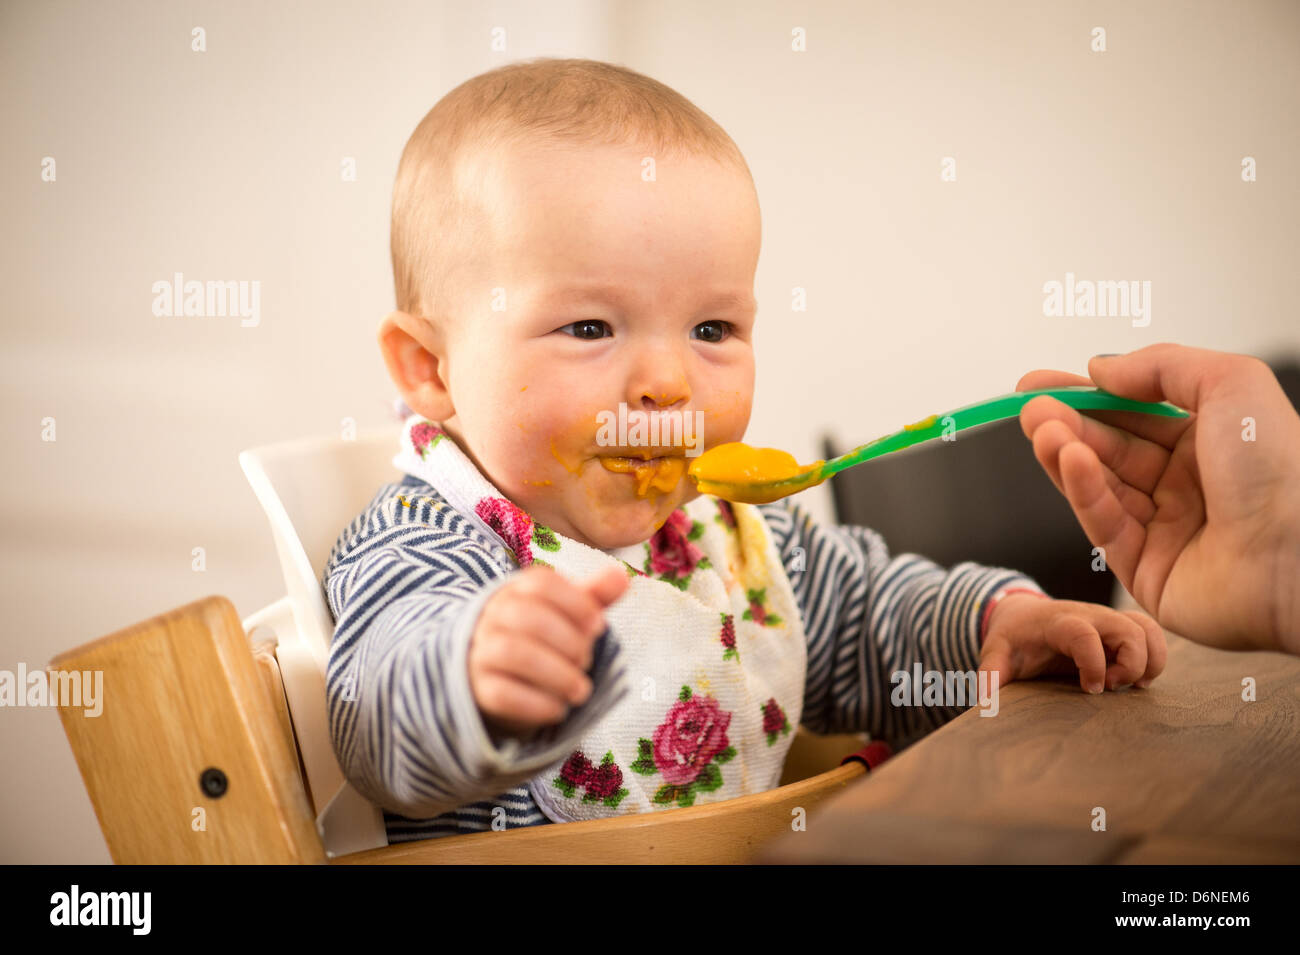 Berlin, Germany, 8-month-old baby while Fuettern Stock Photo